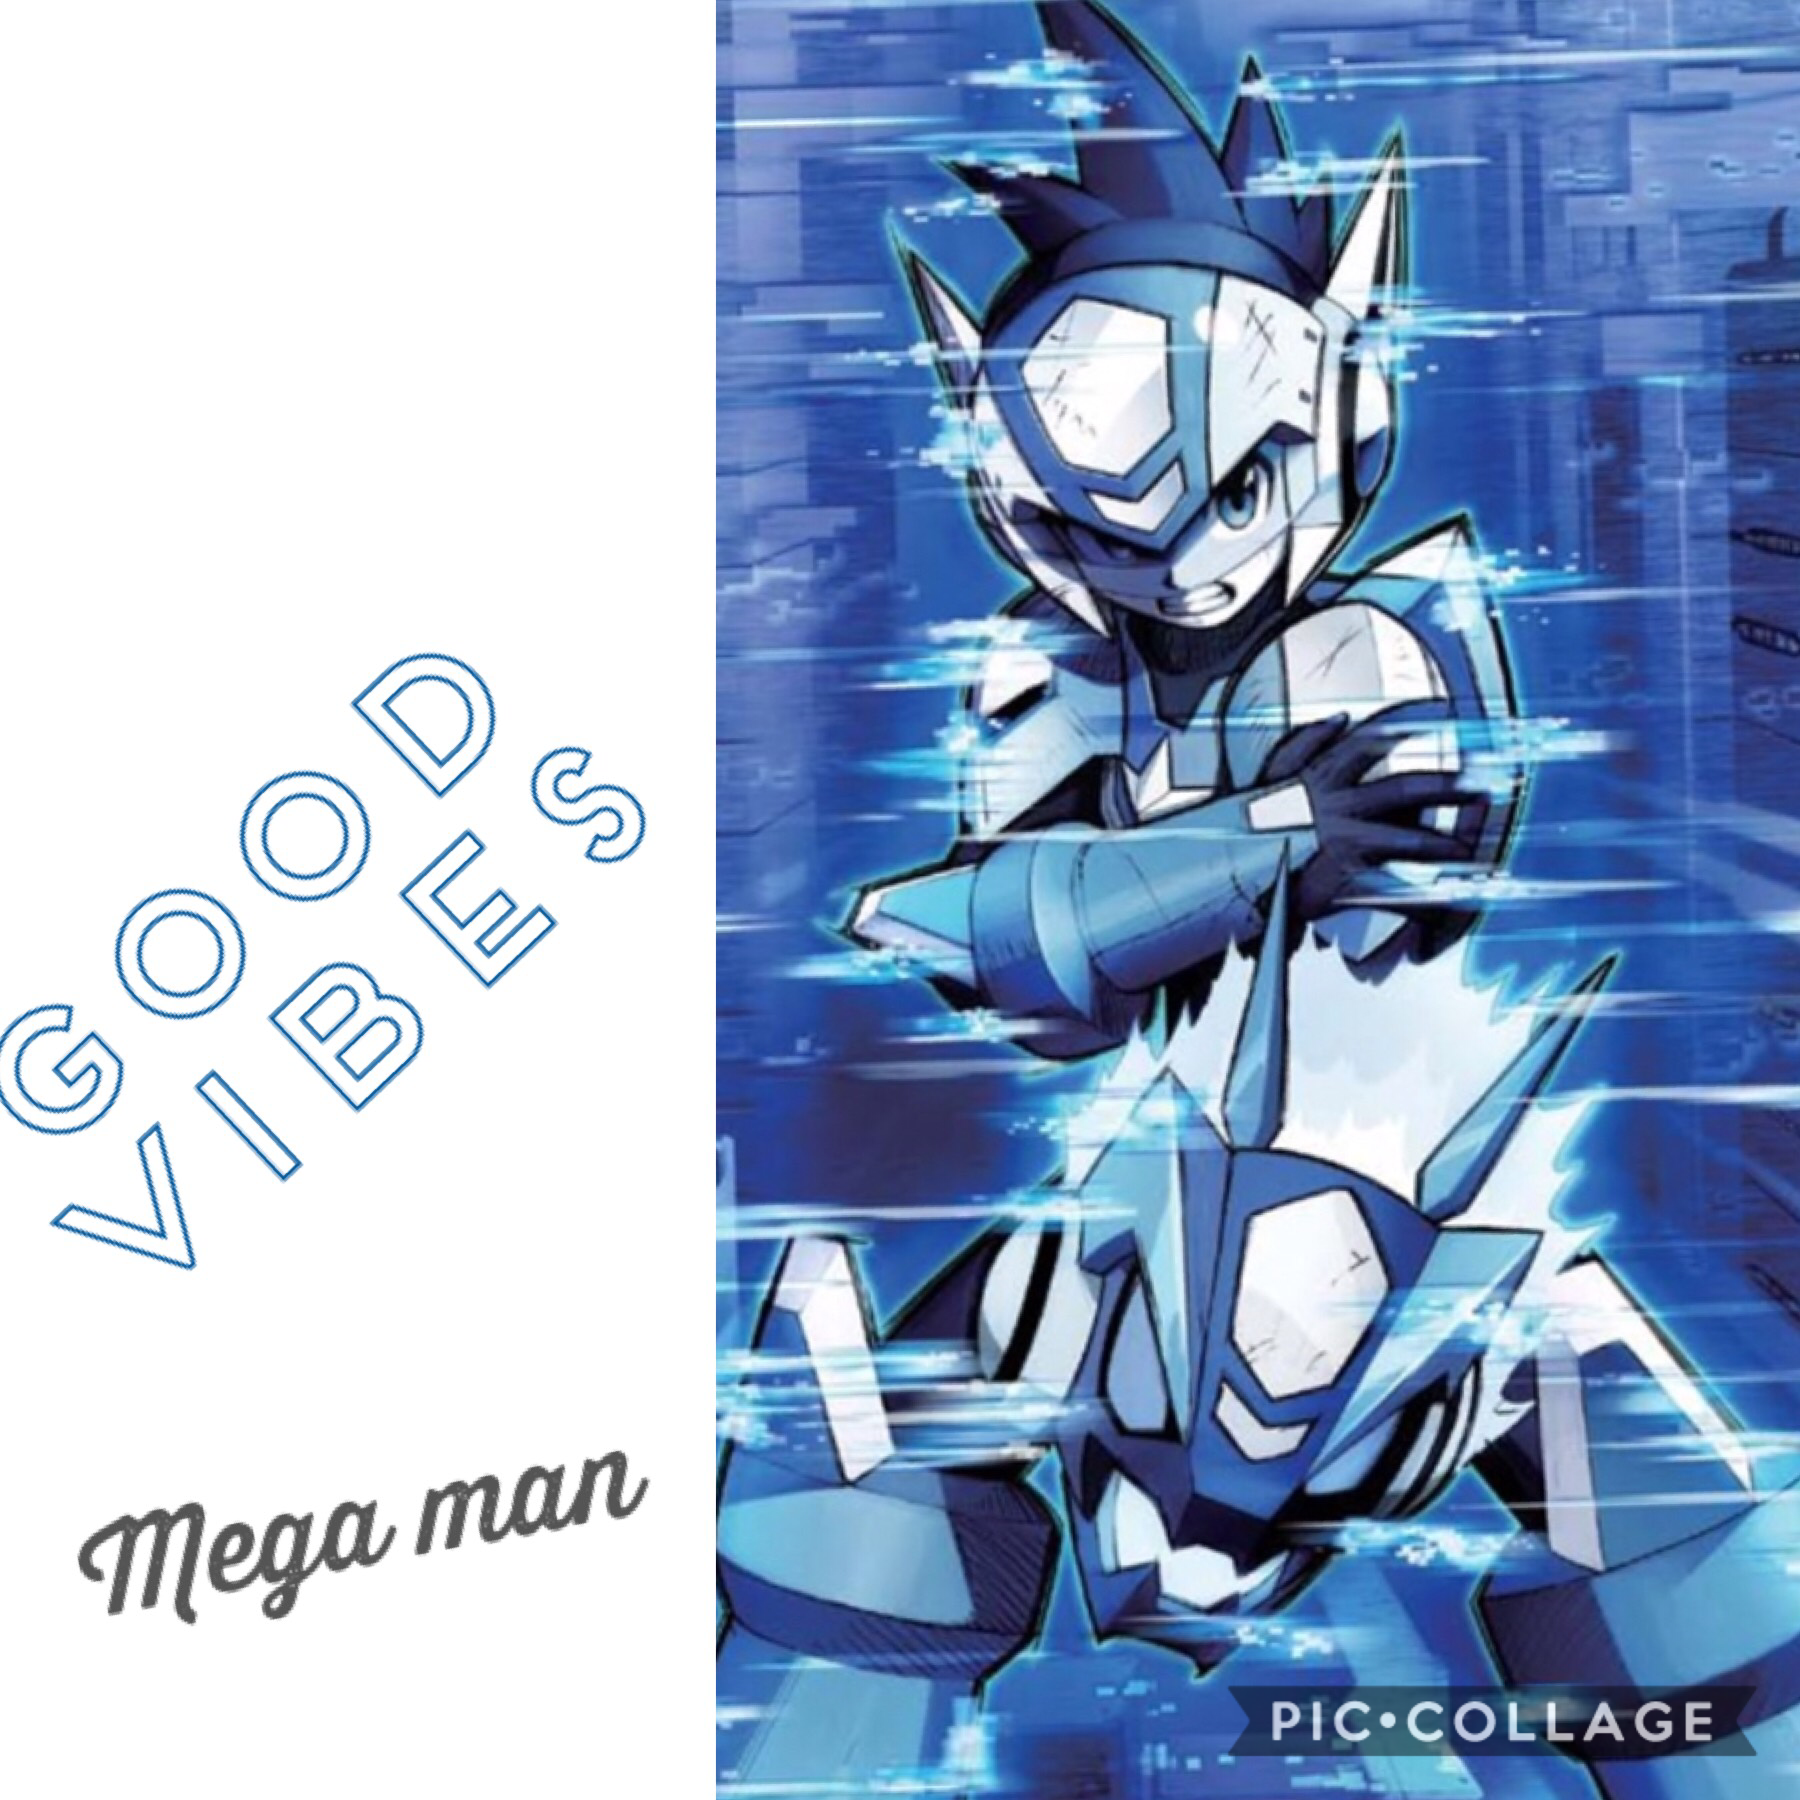 Mega Man is the best video game 🎮 ever in the history of video games that capcom 
Made 